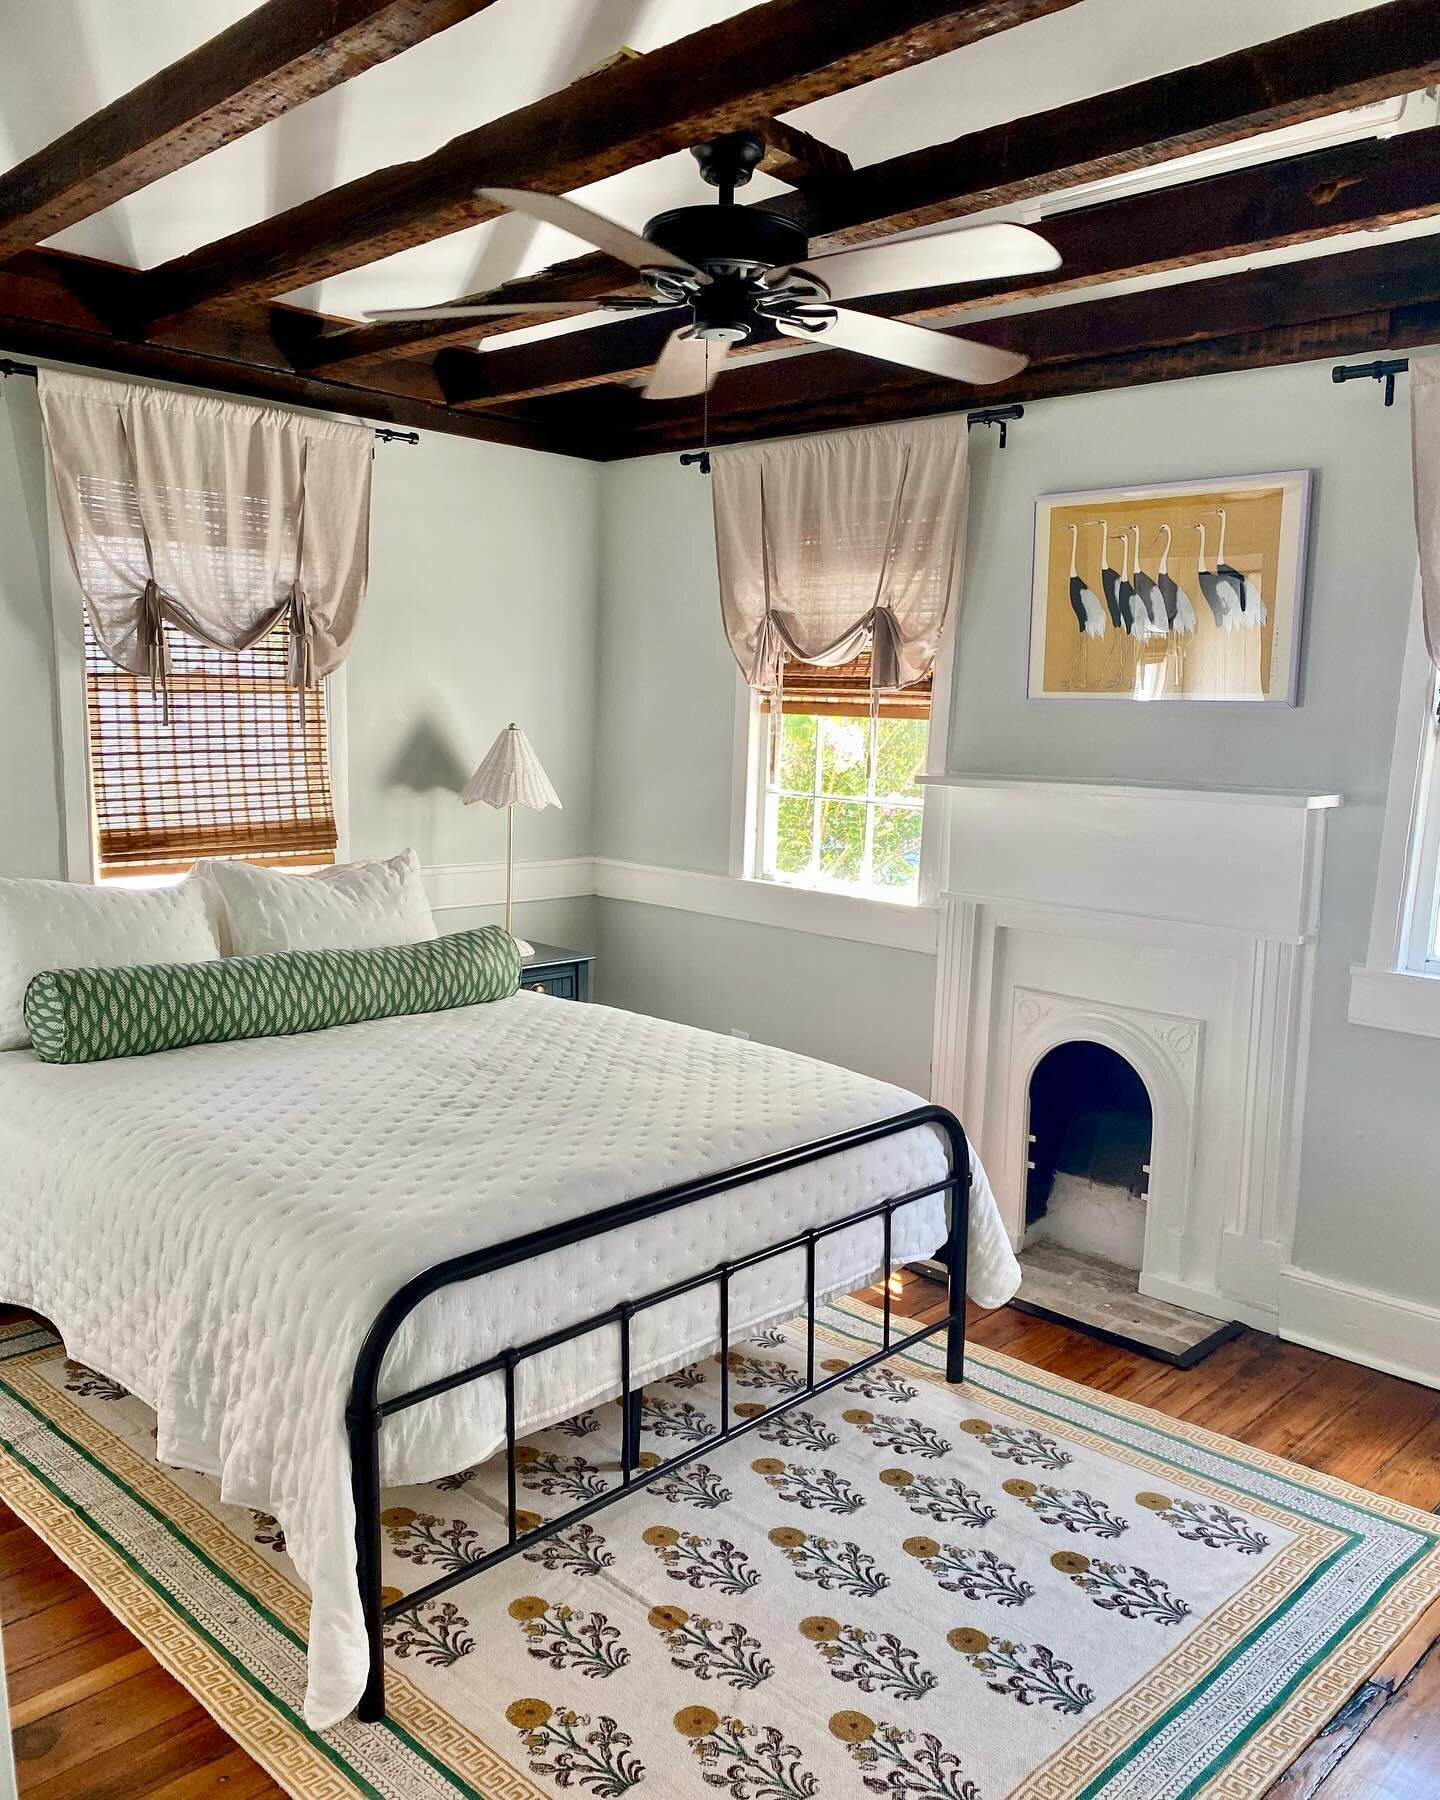 Finally sharing some more #BTS of our #CharlestonCottage project. 🏡 
This house is an oldie, built back in the 1850&rsquo;s, and cozy as can be, so I wanted to embrace the cottage feel and lean into eclectic pattern-mixing. There is much more layeri